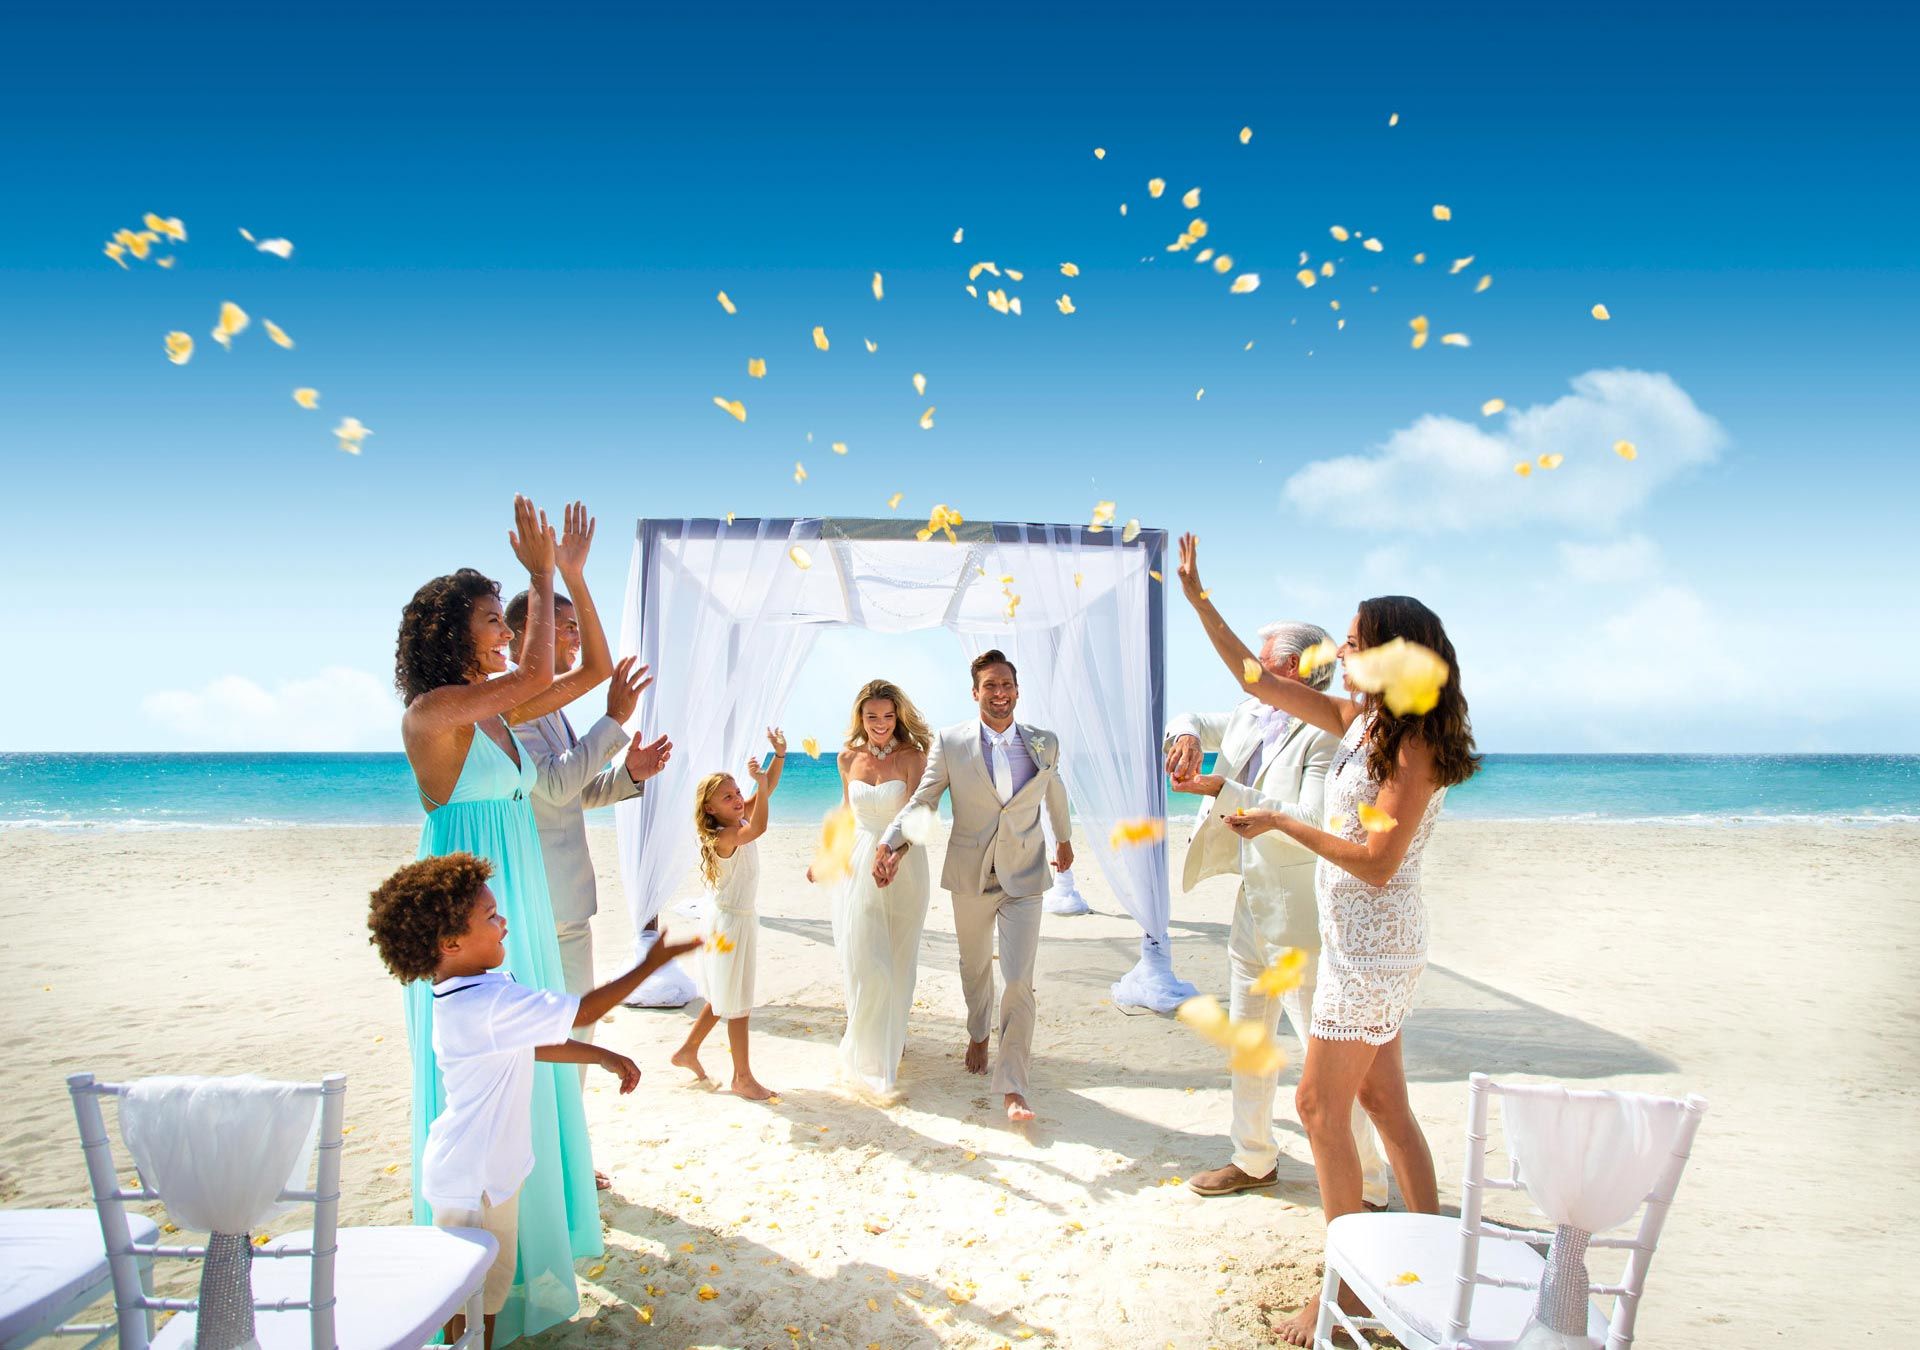 Beach Wedding: Inspiration, Venues & Tips from Experts